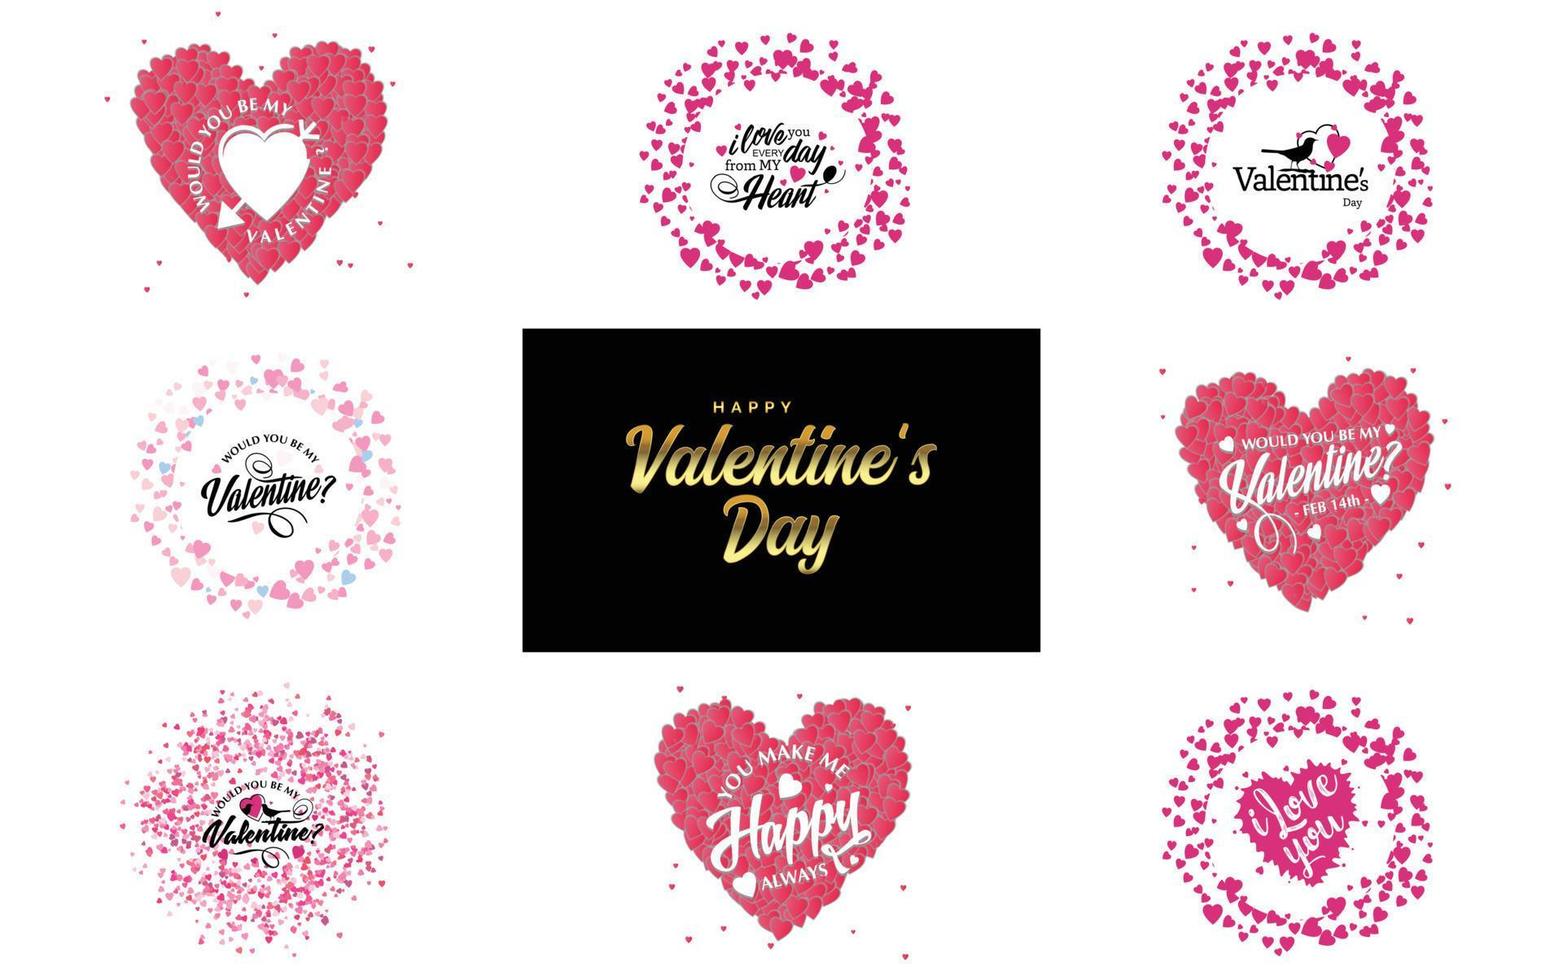 Valentine's hand-drawn lettering with a heart design. Suitable for use in Valentine's Day designs or as a romantic greeting vector